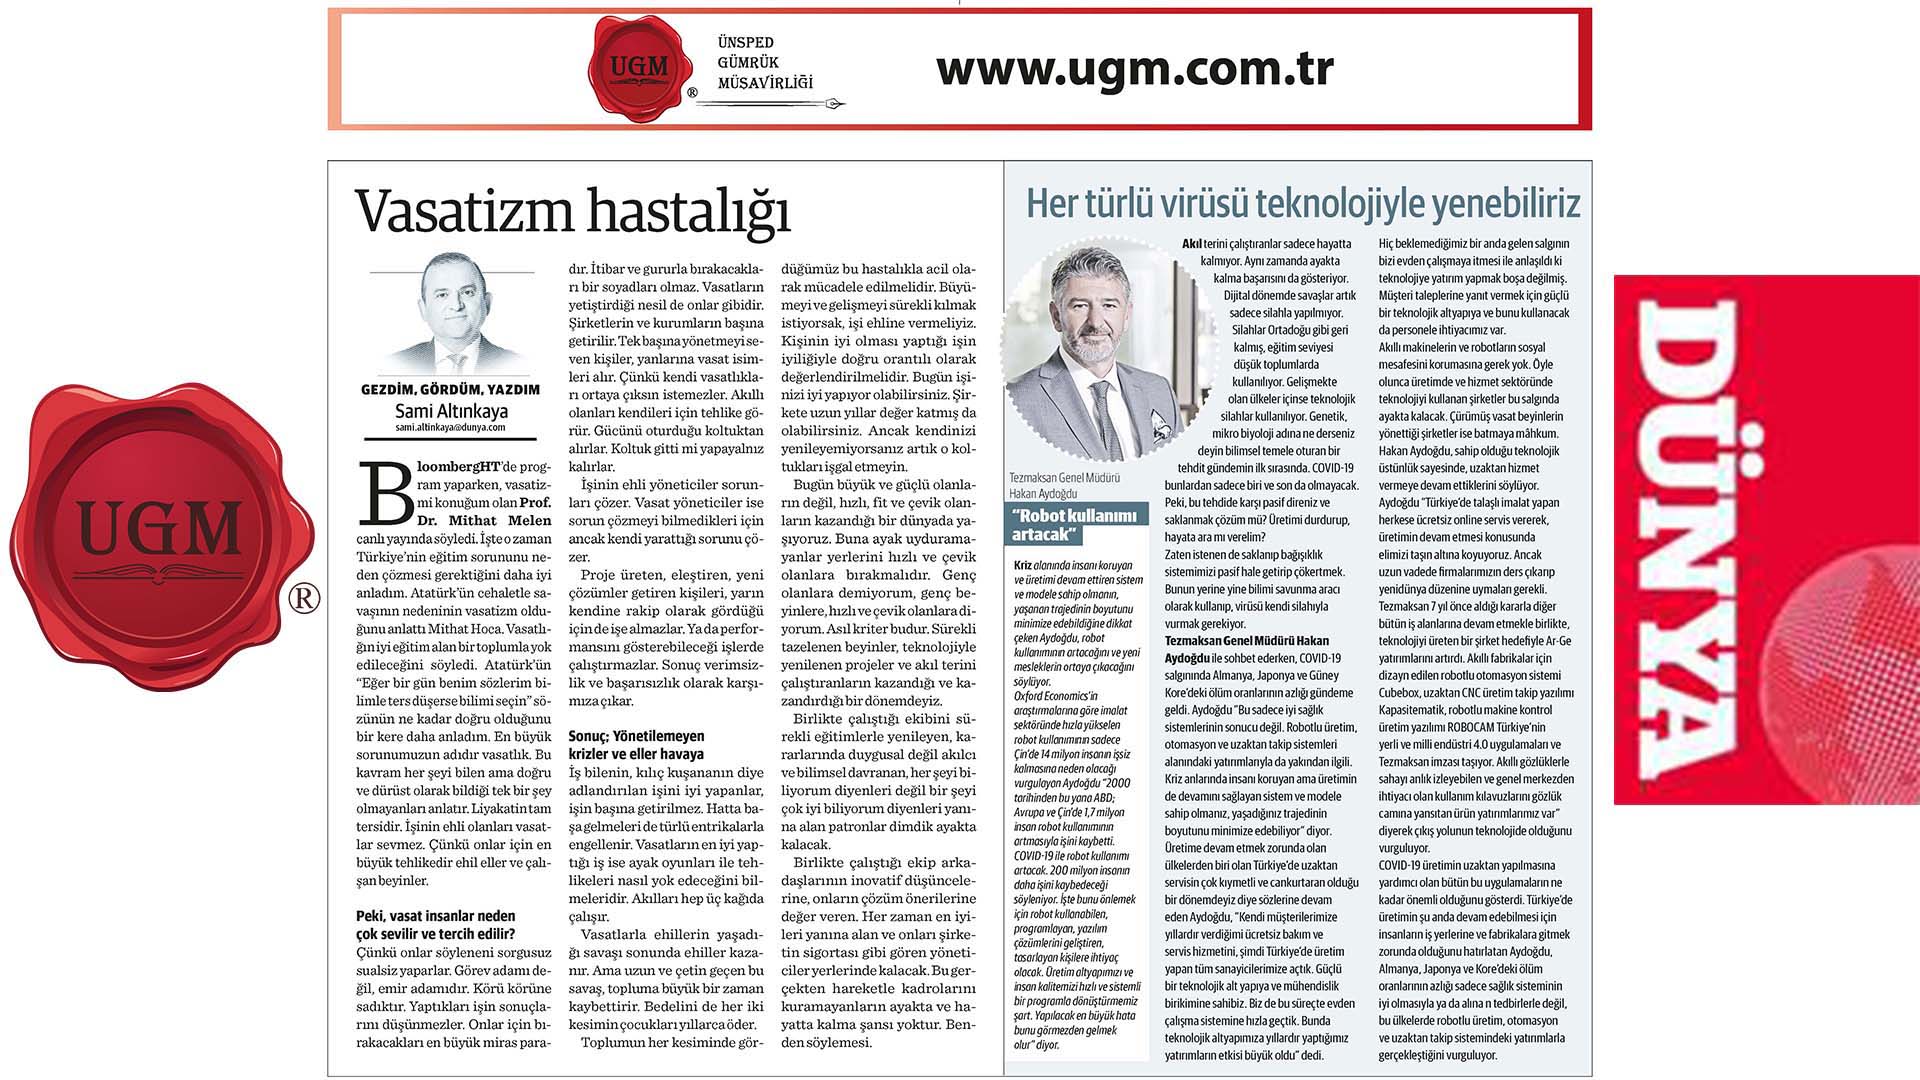 Our UGM Corporate Communications Director Sami Altınkaya's article titled "Mediocracy Disease" was published in Dünya newspaper on 22.06.2020.